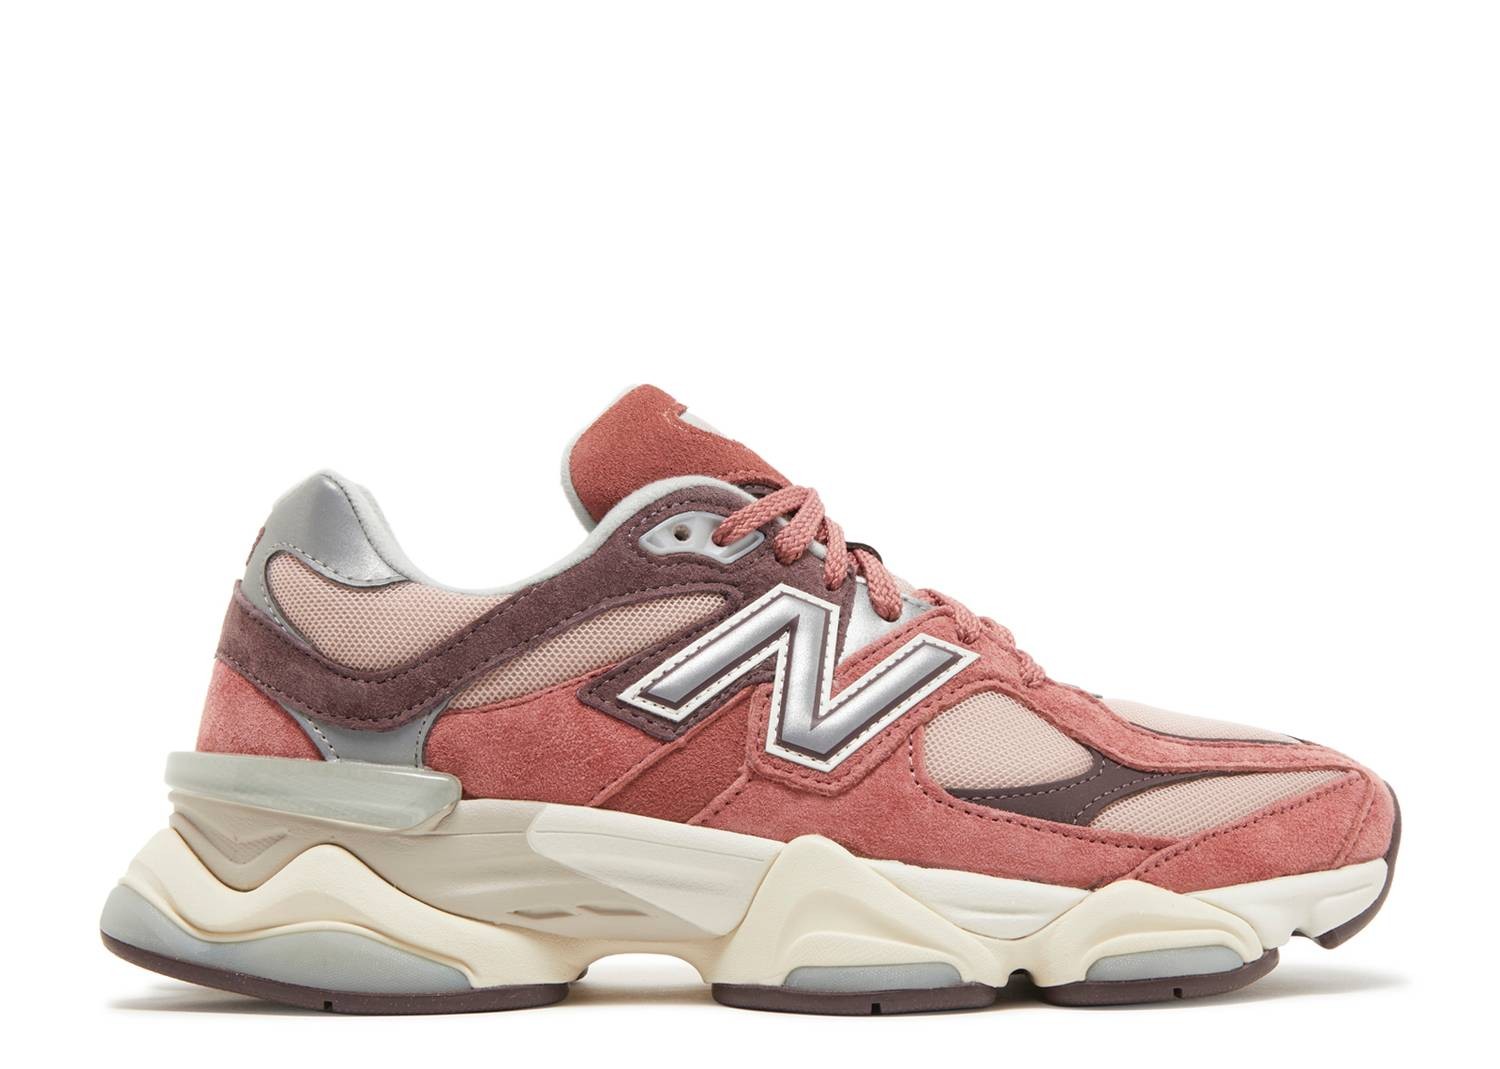 New Balance 9060 Cherry Blossom Pack Mineral Red